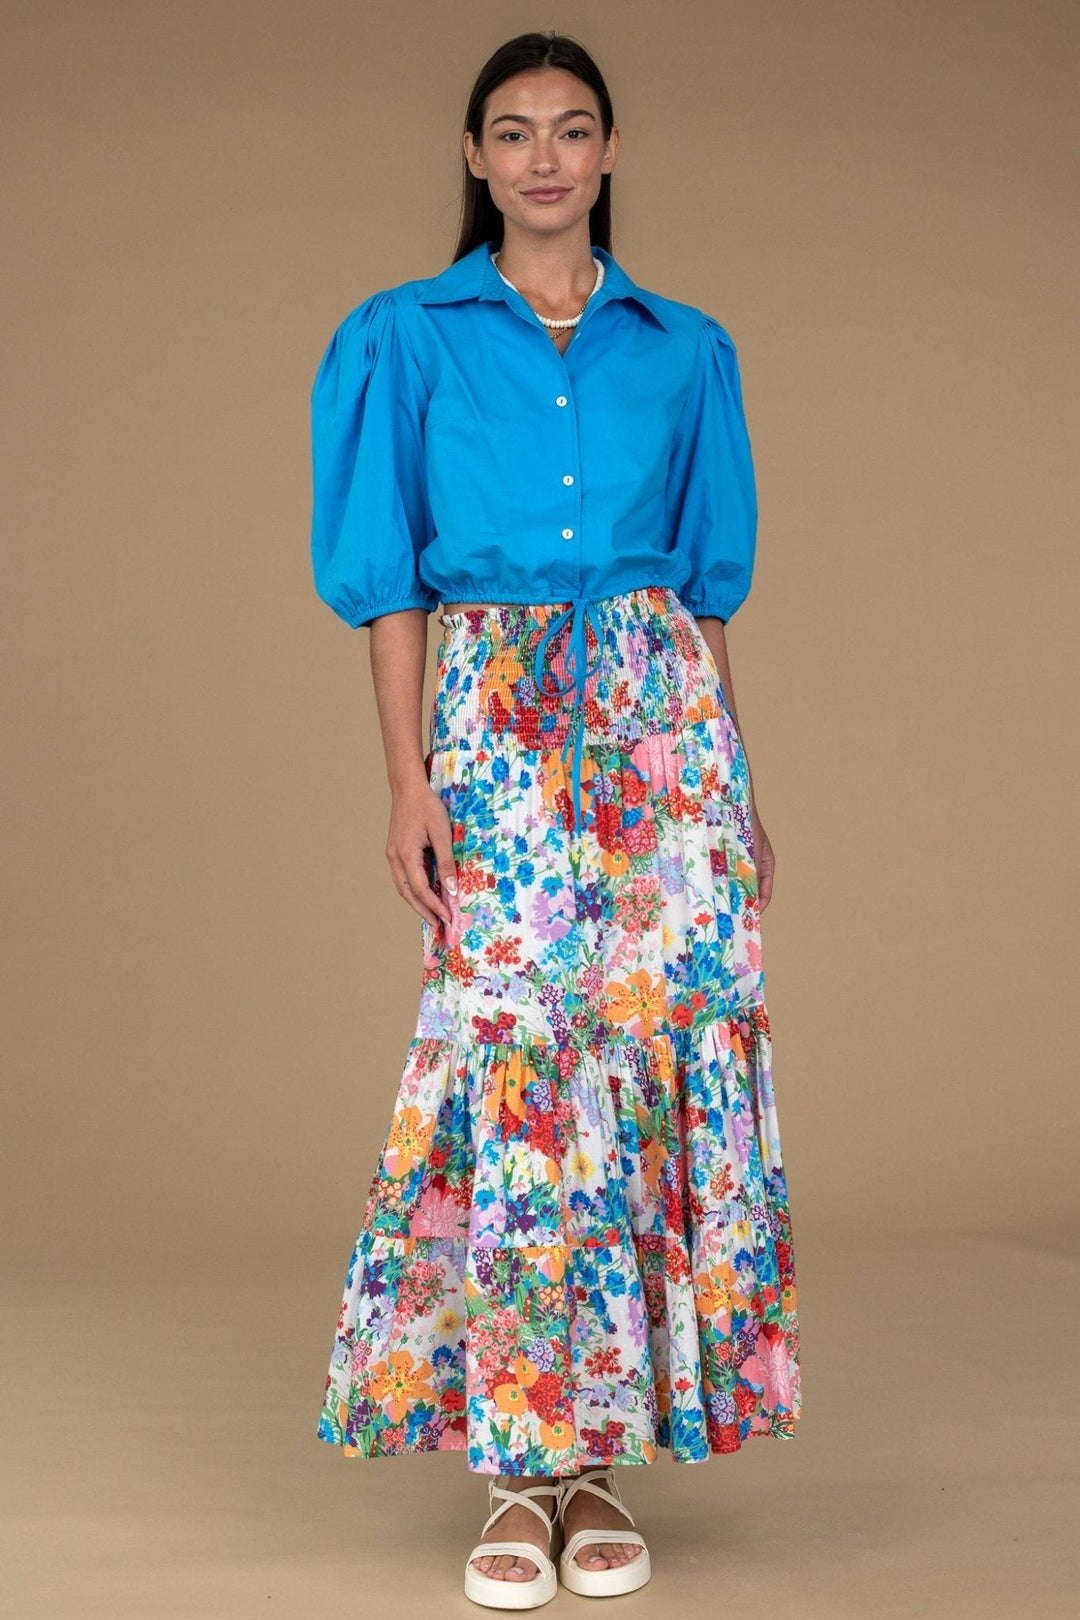 Olivia James - Izzy Skirt Dress: Bouquet - Shorely Chic Boutique